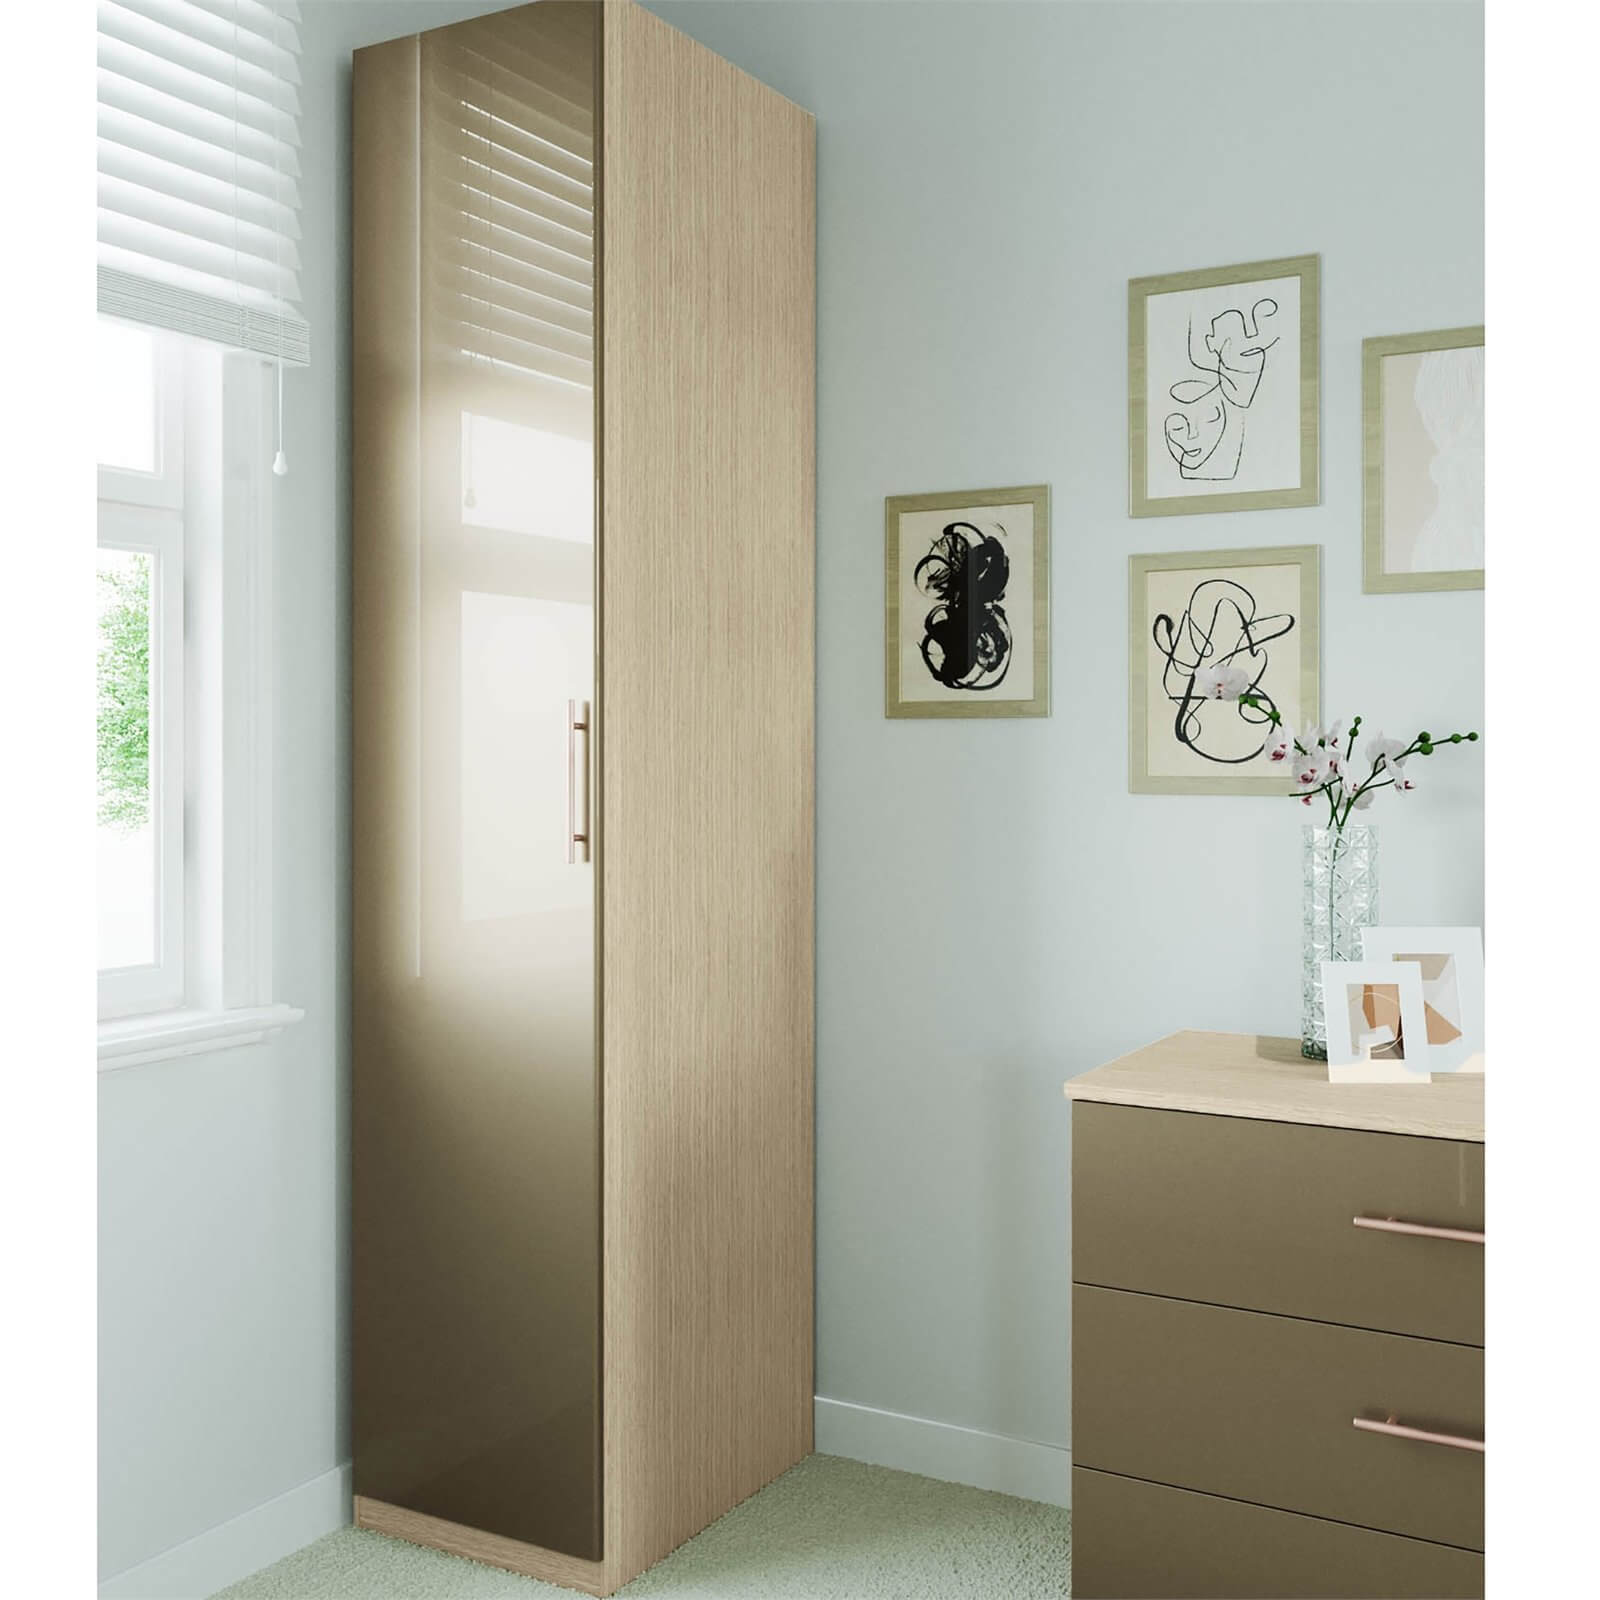 Fitted Bedroom Slab Single Wardrobe - Champagne